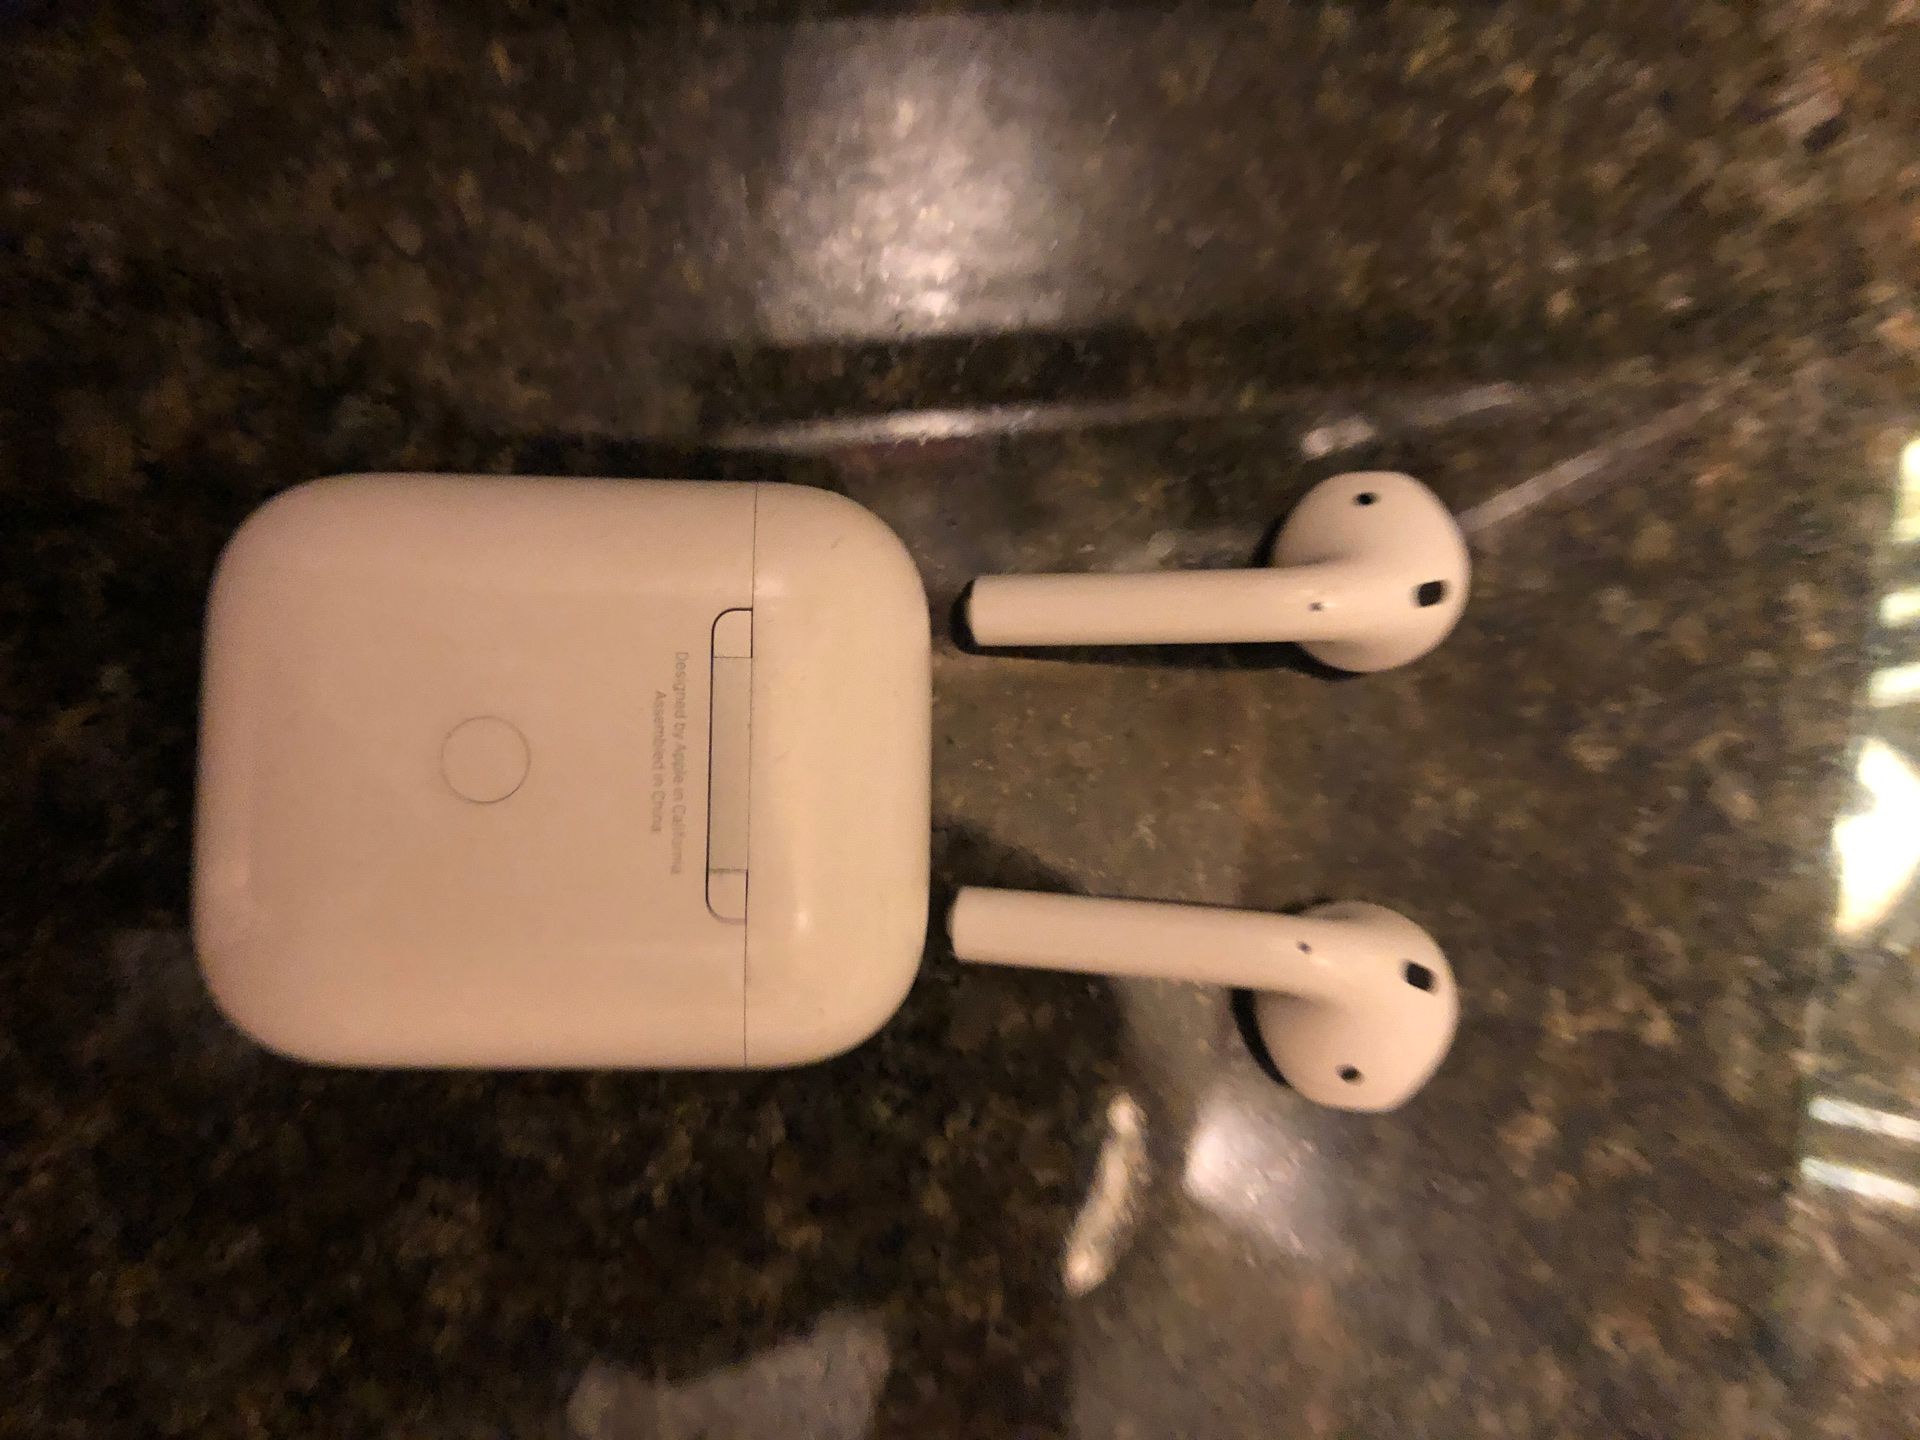 Apple AirPods 2 with wireless charging case.